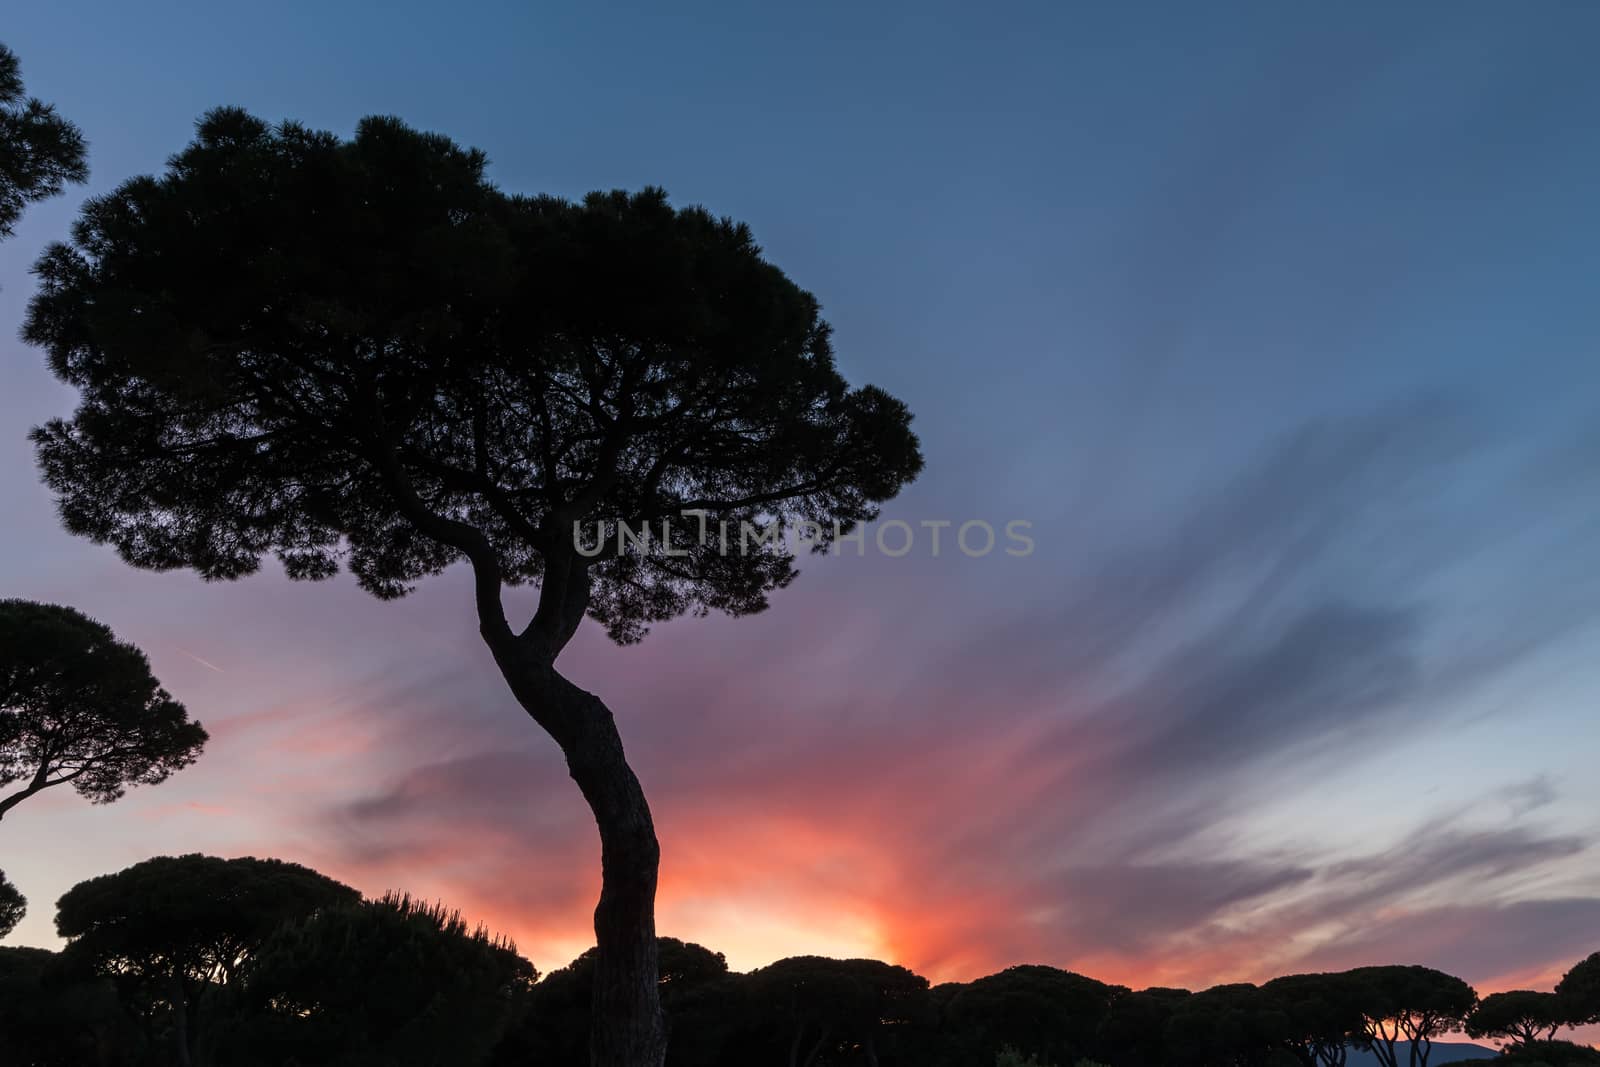 Italian sunset on the background of pines by master1305